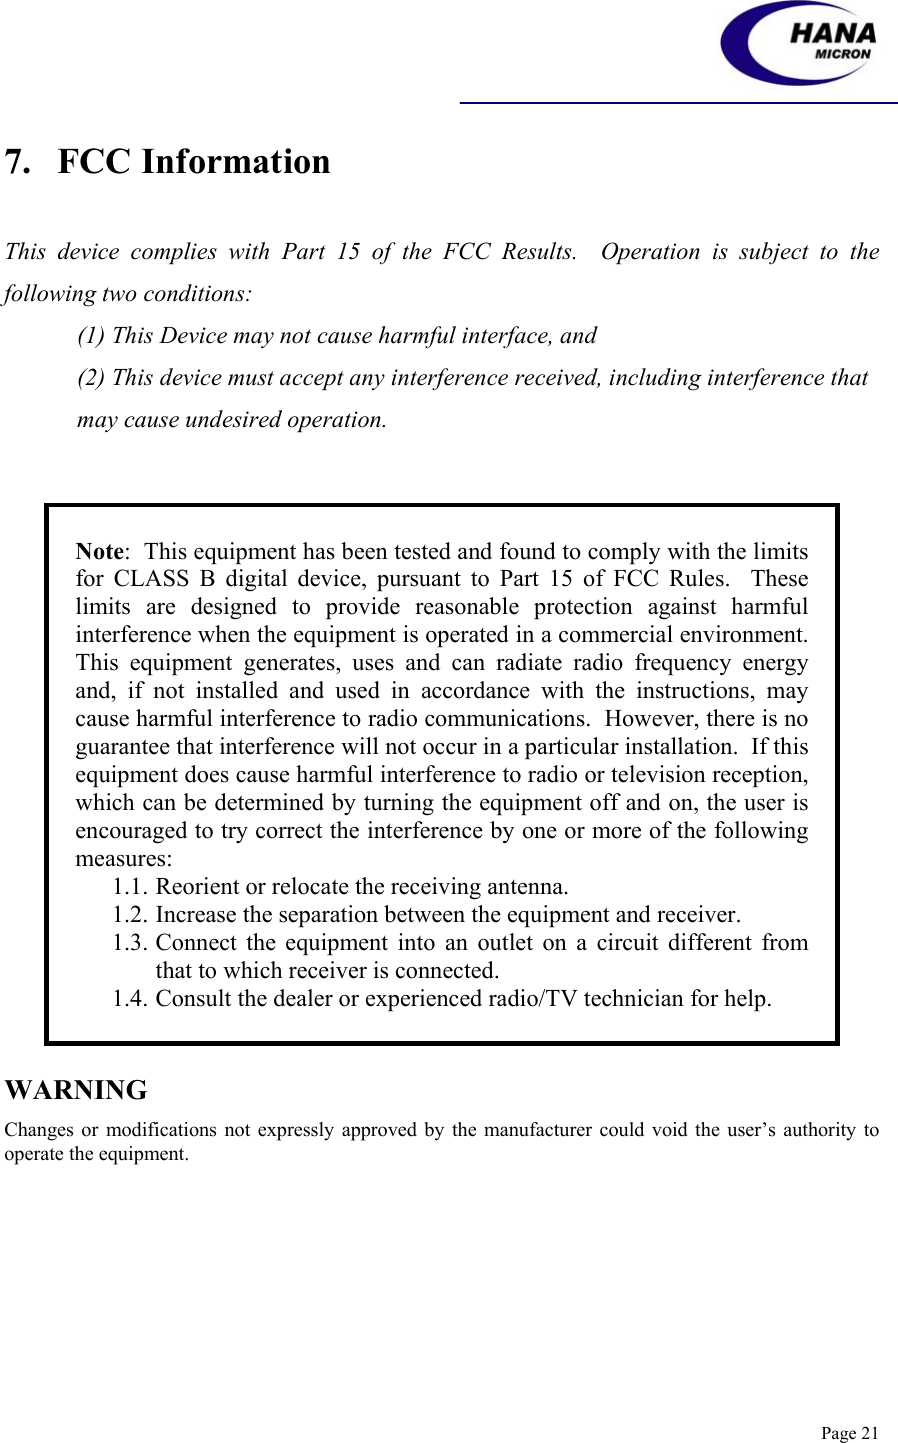    Page 21 7.   FCC Information   This device complies with Part 15 of the FCC Results.  Operation is subject to the following two conditions: (1) This Device may not cause harmful interface, and (2) This device must accept any interference received, including interference that may cause undesired operation.   Note:  This equipment has been tested and found to comply with the limits for CLASS B digital device, pursuant to Part 15 of FCC Rules.  These limits are designed to provide reasonable protection against harmful interference when the equipment is operated in a commercial environment.  This equipment generates, uses and can radiate radio frequency energy and, if not installed and used in accordance with the instructions, may cause harmful interference to radio communications.  However, there is no guarantee that interference will not occur in a particular installation.  If this equipment does cause harmful interference to radio or television reception, which can be determined by turning the equipment off and on, the user is encouraged to try correct the interference by one or more of the following measures: 1.1. Reorient or relocate the receiving antenna. 1.2. Increase the separation between the equipment and receiver. 1.3. Connect the equipment into an outlet on a circuit different from that to which receiver is connected. 1.4. Consult the dealer or experienced radio/TV technician for help.  WARNING Changes or modifications not expressly approved by the manufacturer could void the user’s authority to operate the equipment. 